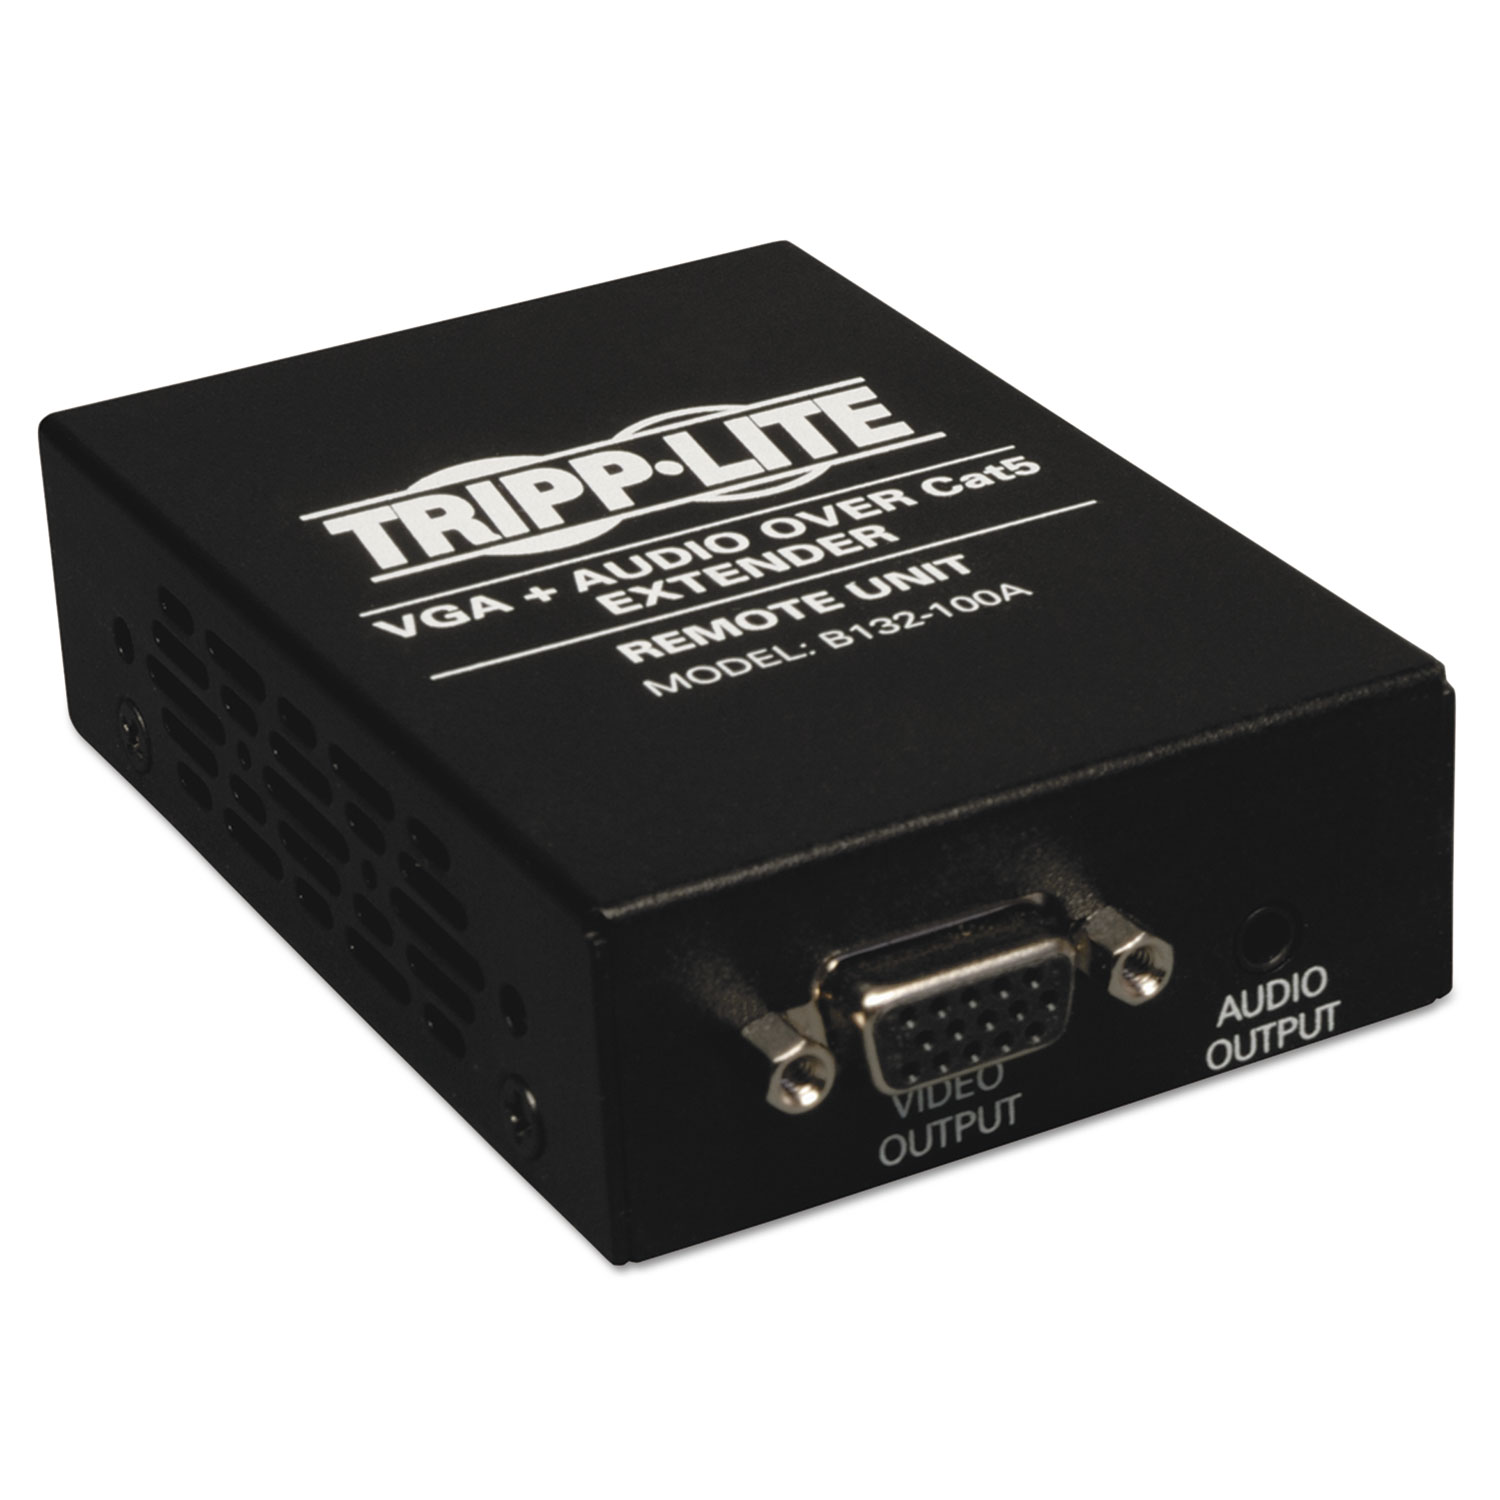  Tripp Lite B132-100A VGA w/Audio over Cat5/Cat6 Extender, Box-Style Receiver, Up to 1000 ft, TAA (TRPB132100A) 